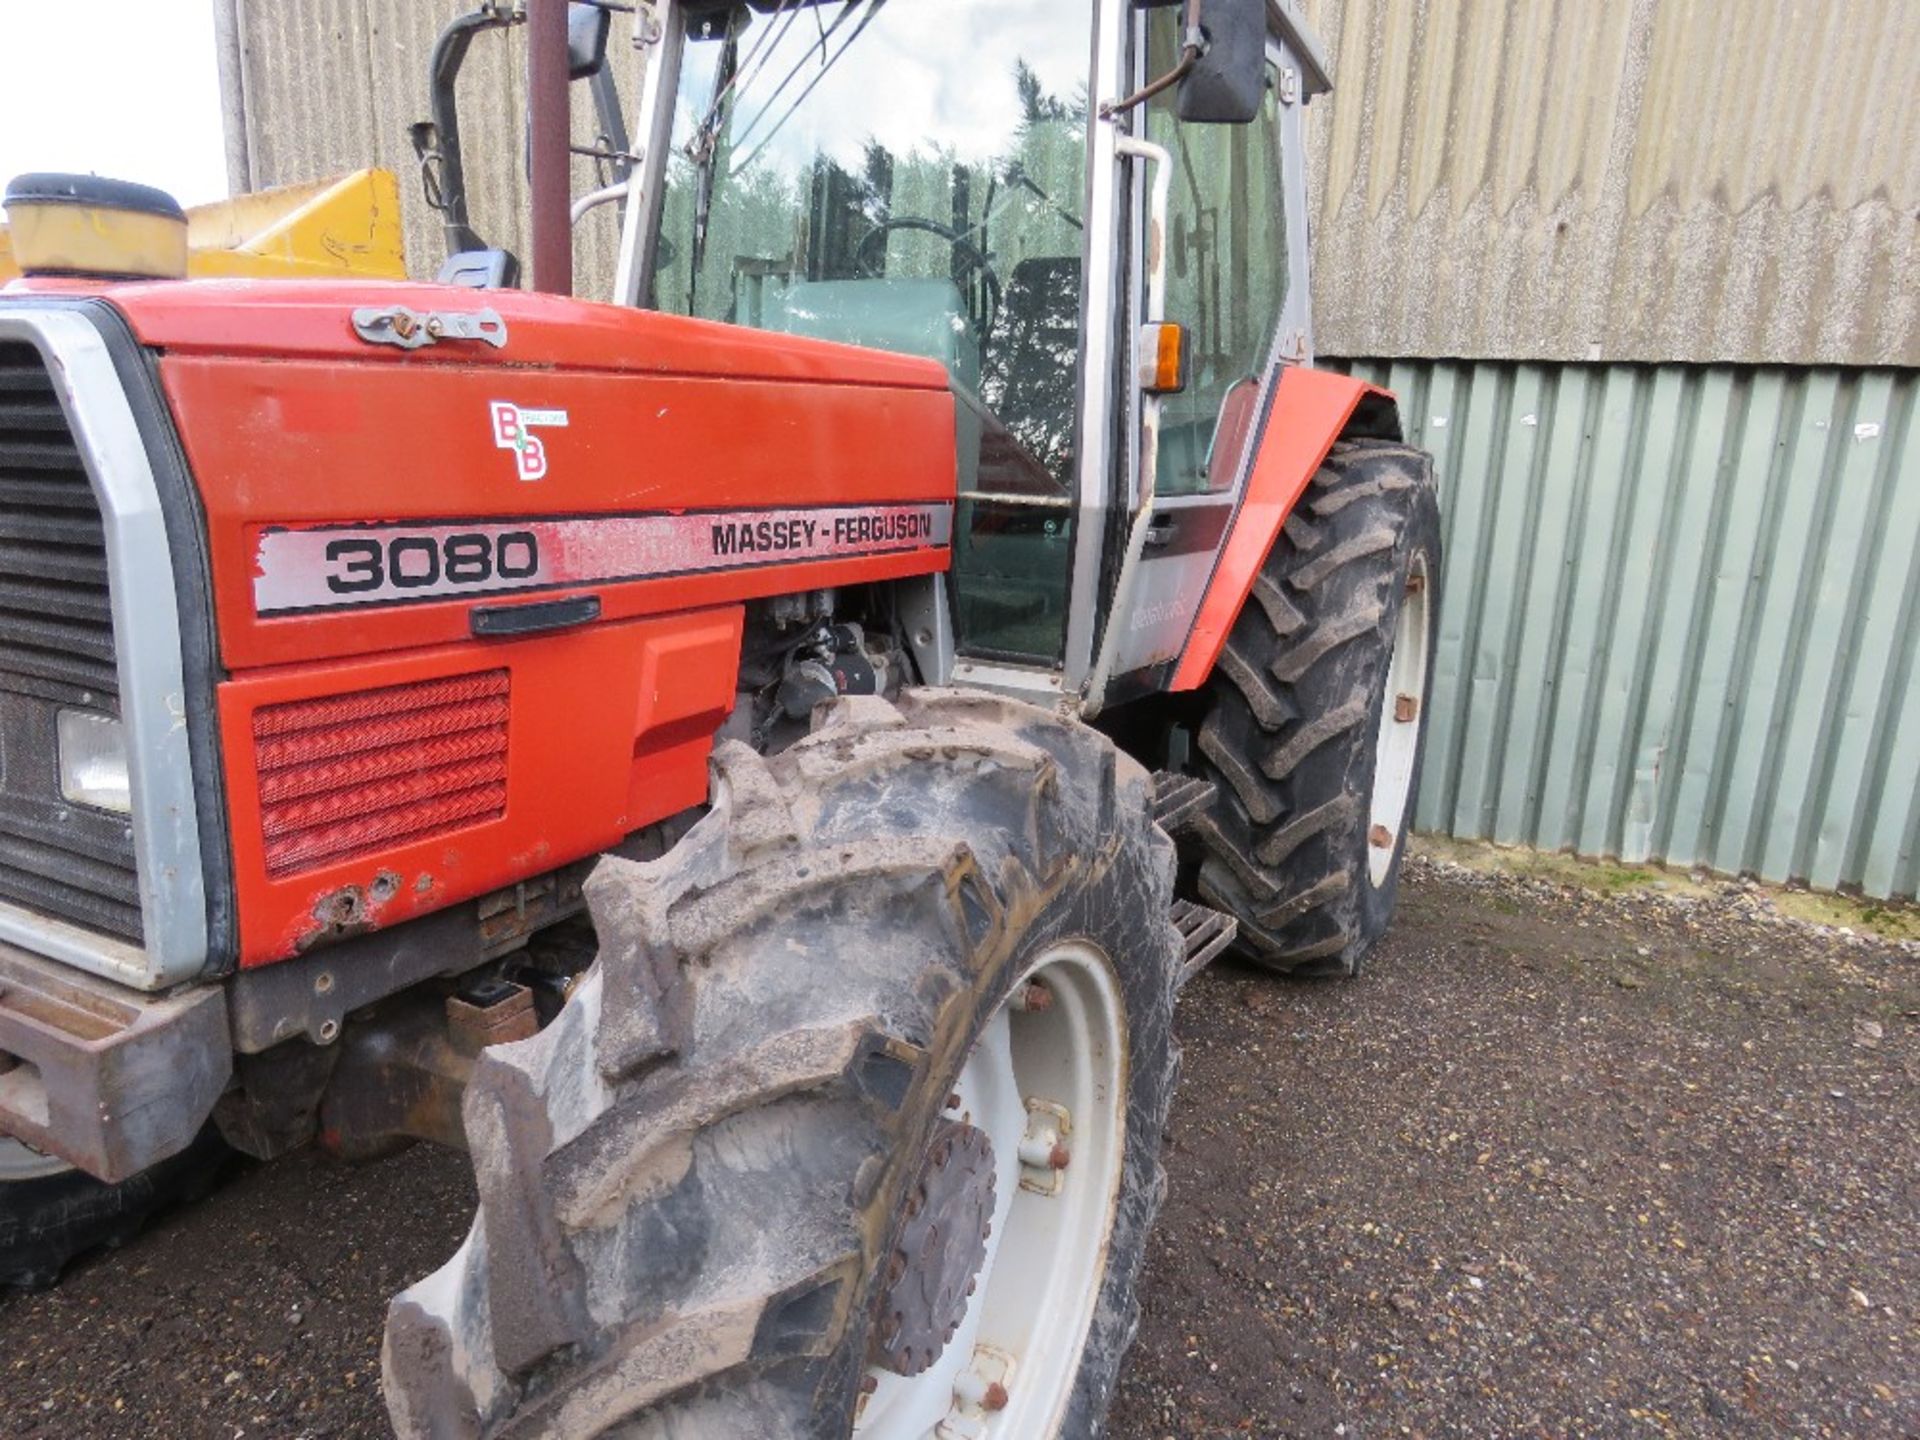 MASSEY FERGUSON 3080 4WD TRACTOR REG:H786 LFA (V5 TO APPLY FOR), 7165 REC HOURS. WHEN TESTED THIS M - Image 2 of 11